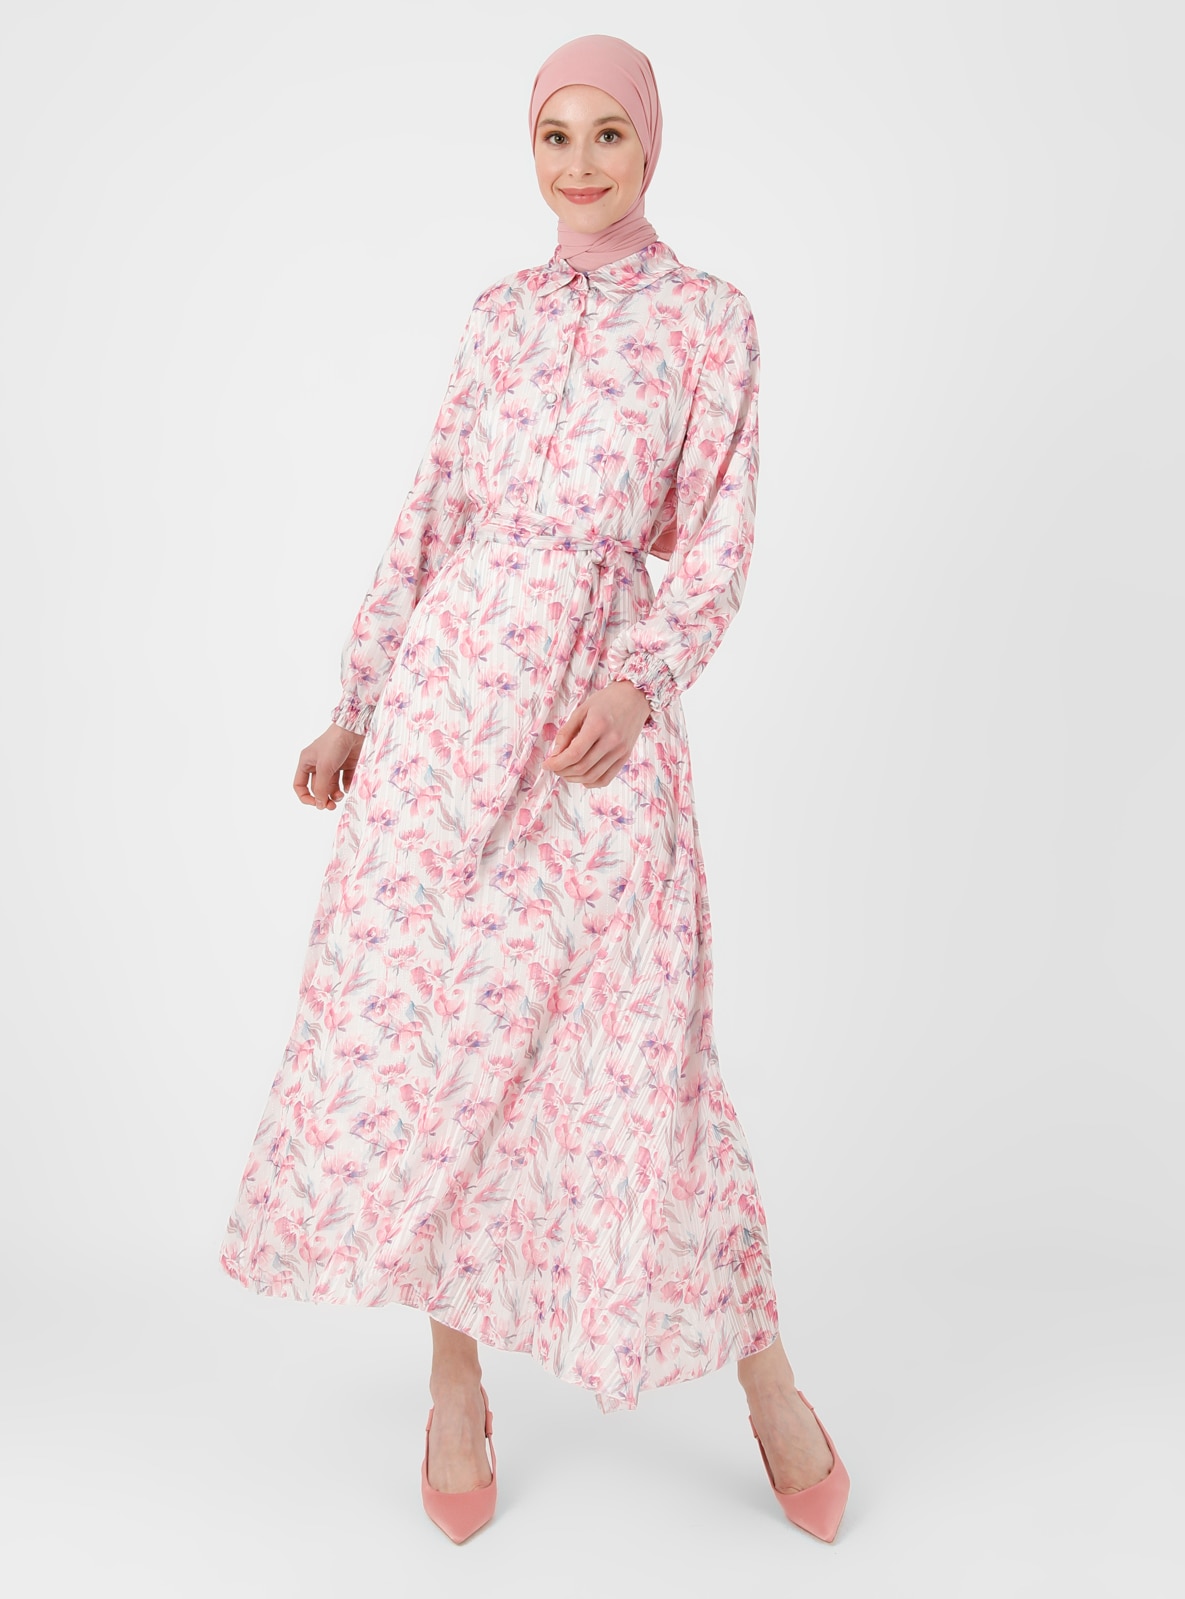 Ecru - Pink - Floral - Point Collar - Fully Lined - Modest Dress